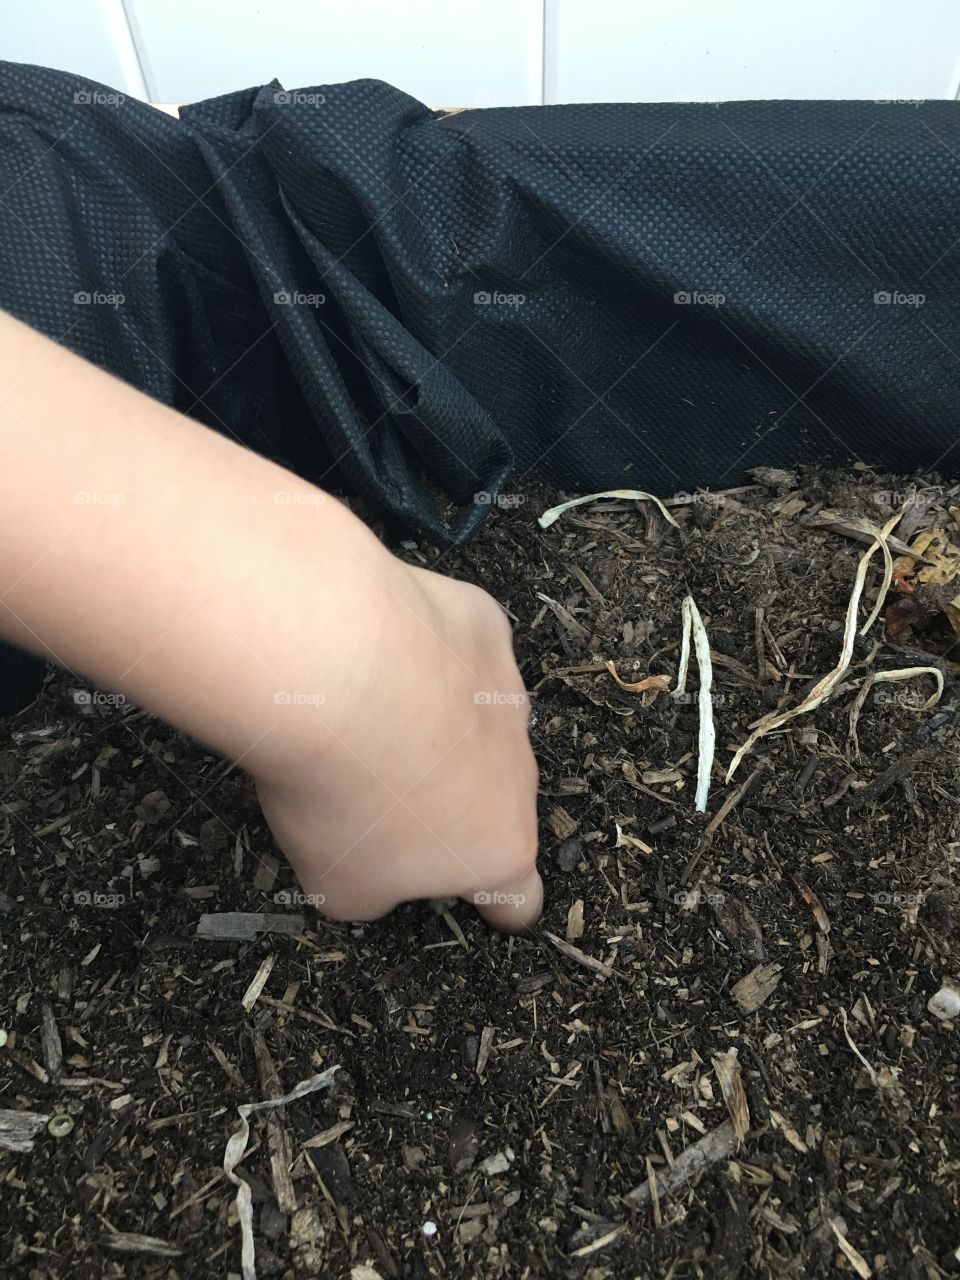 5 year old child preparing the soil for carrot seeds to be grown in